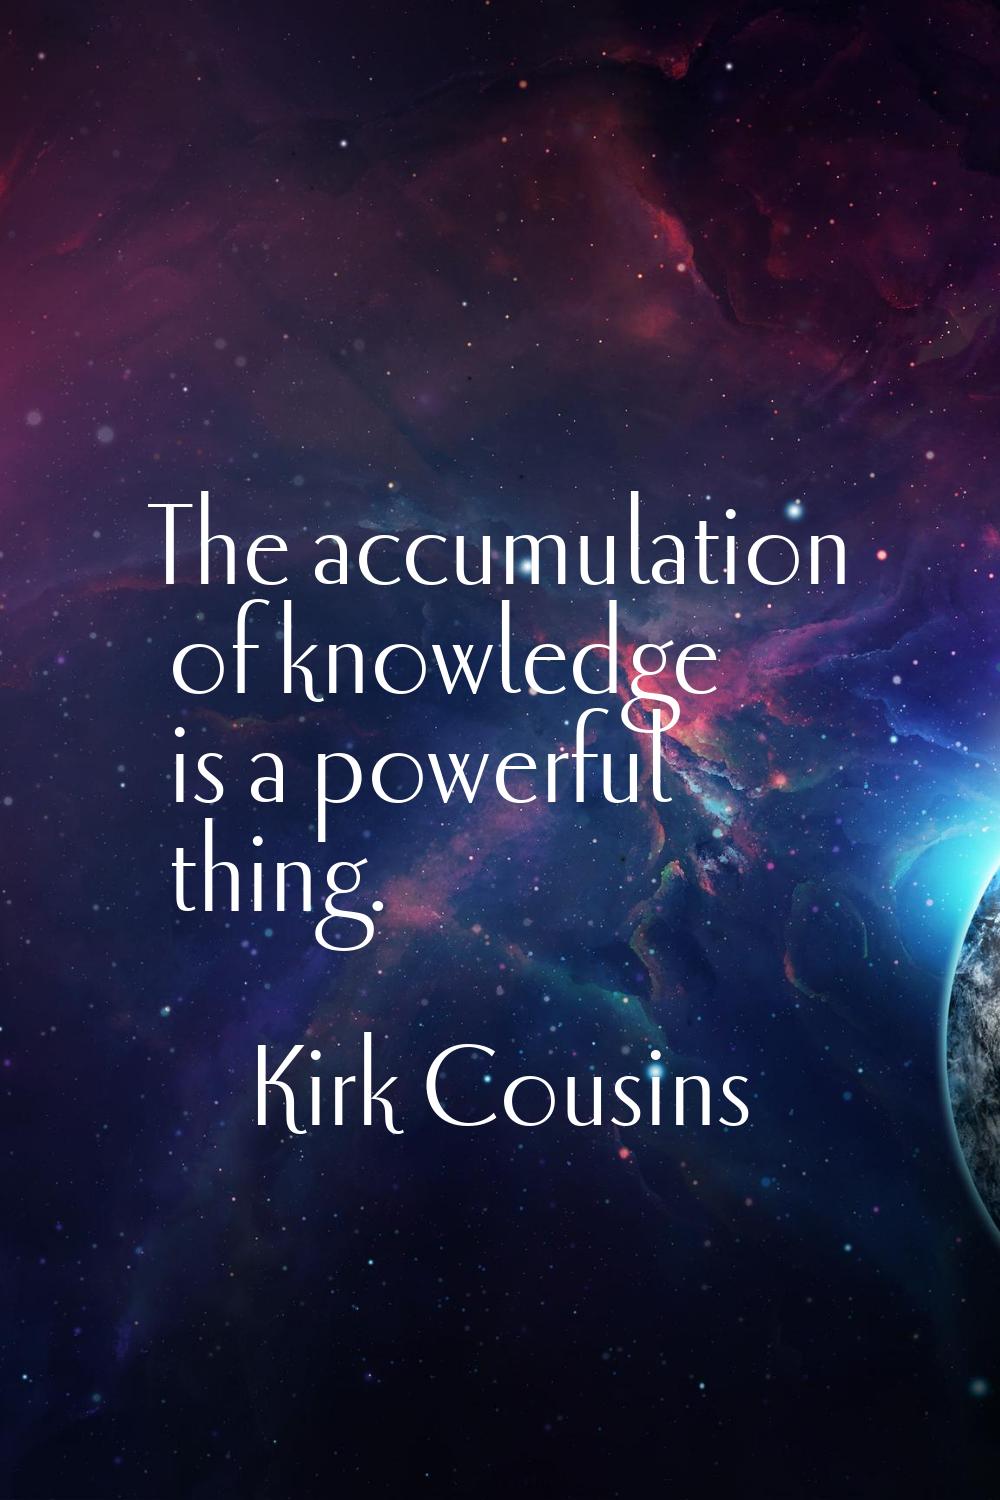 The accumulation of knowledge is a powerful thing.